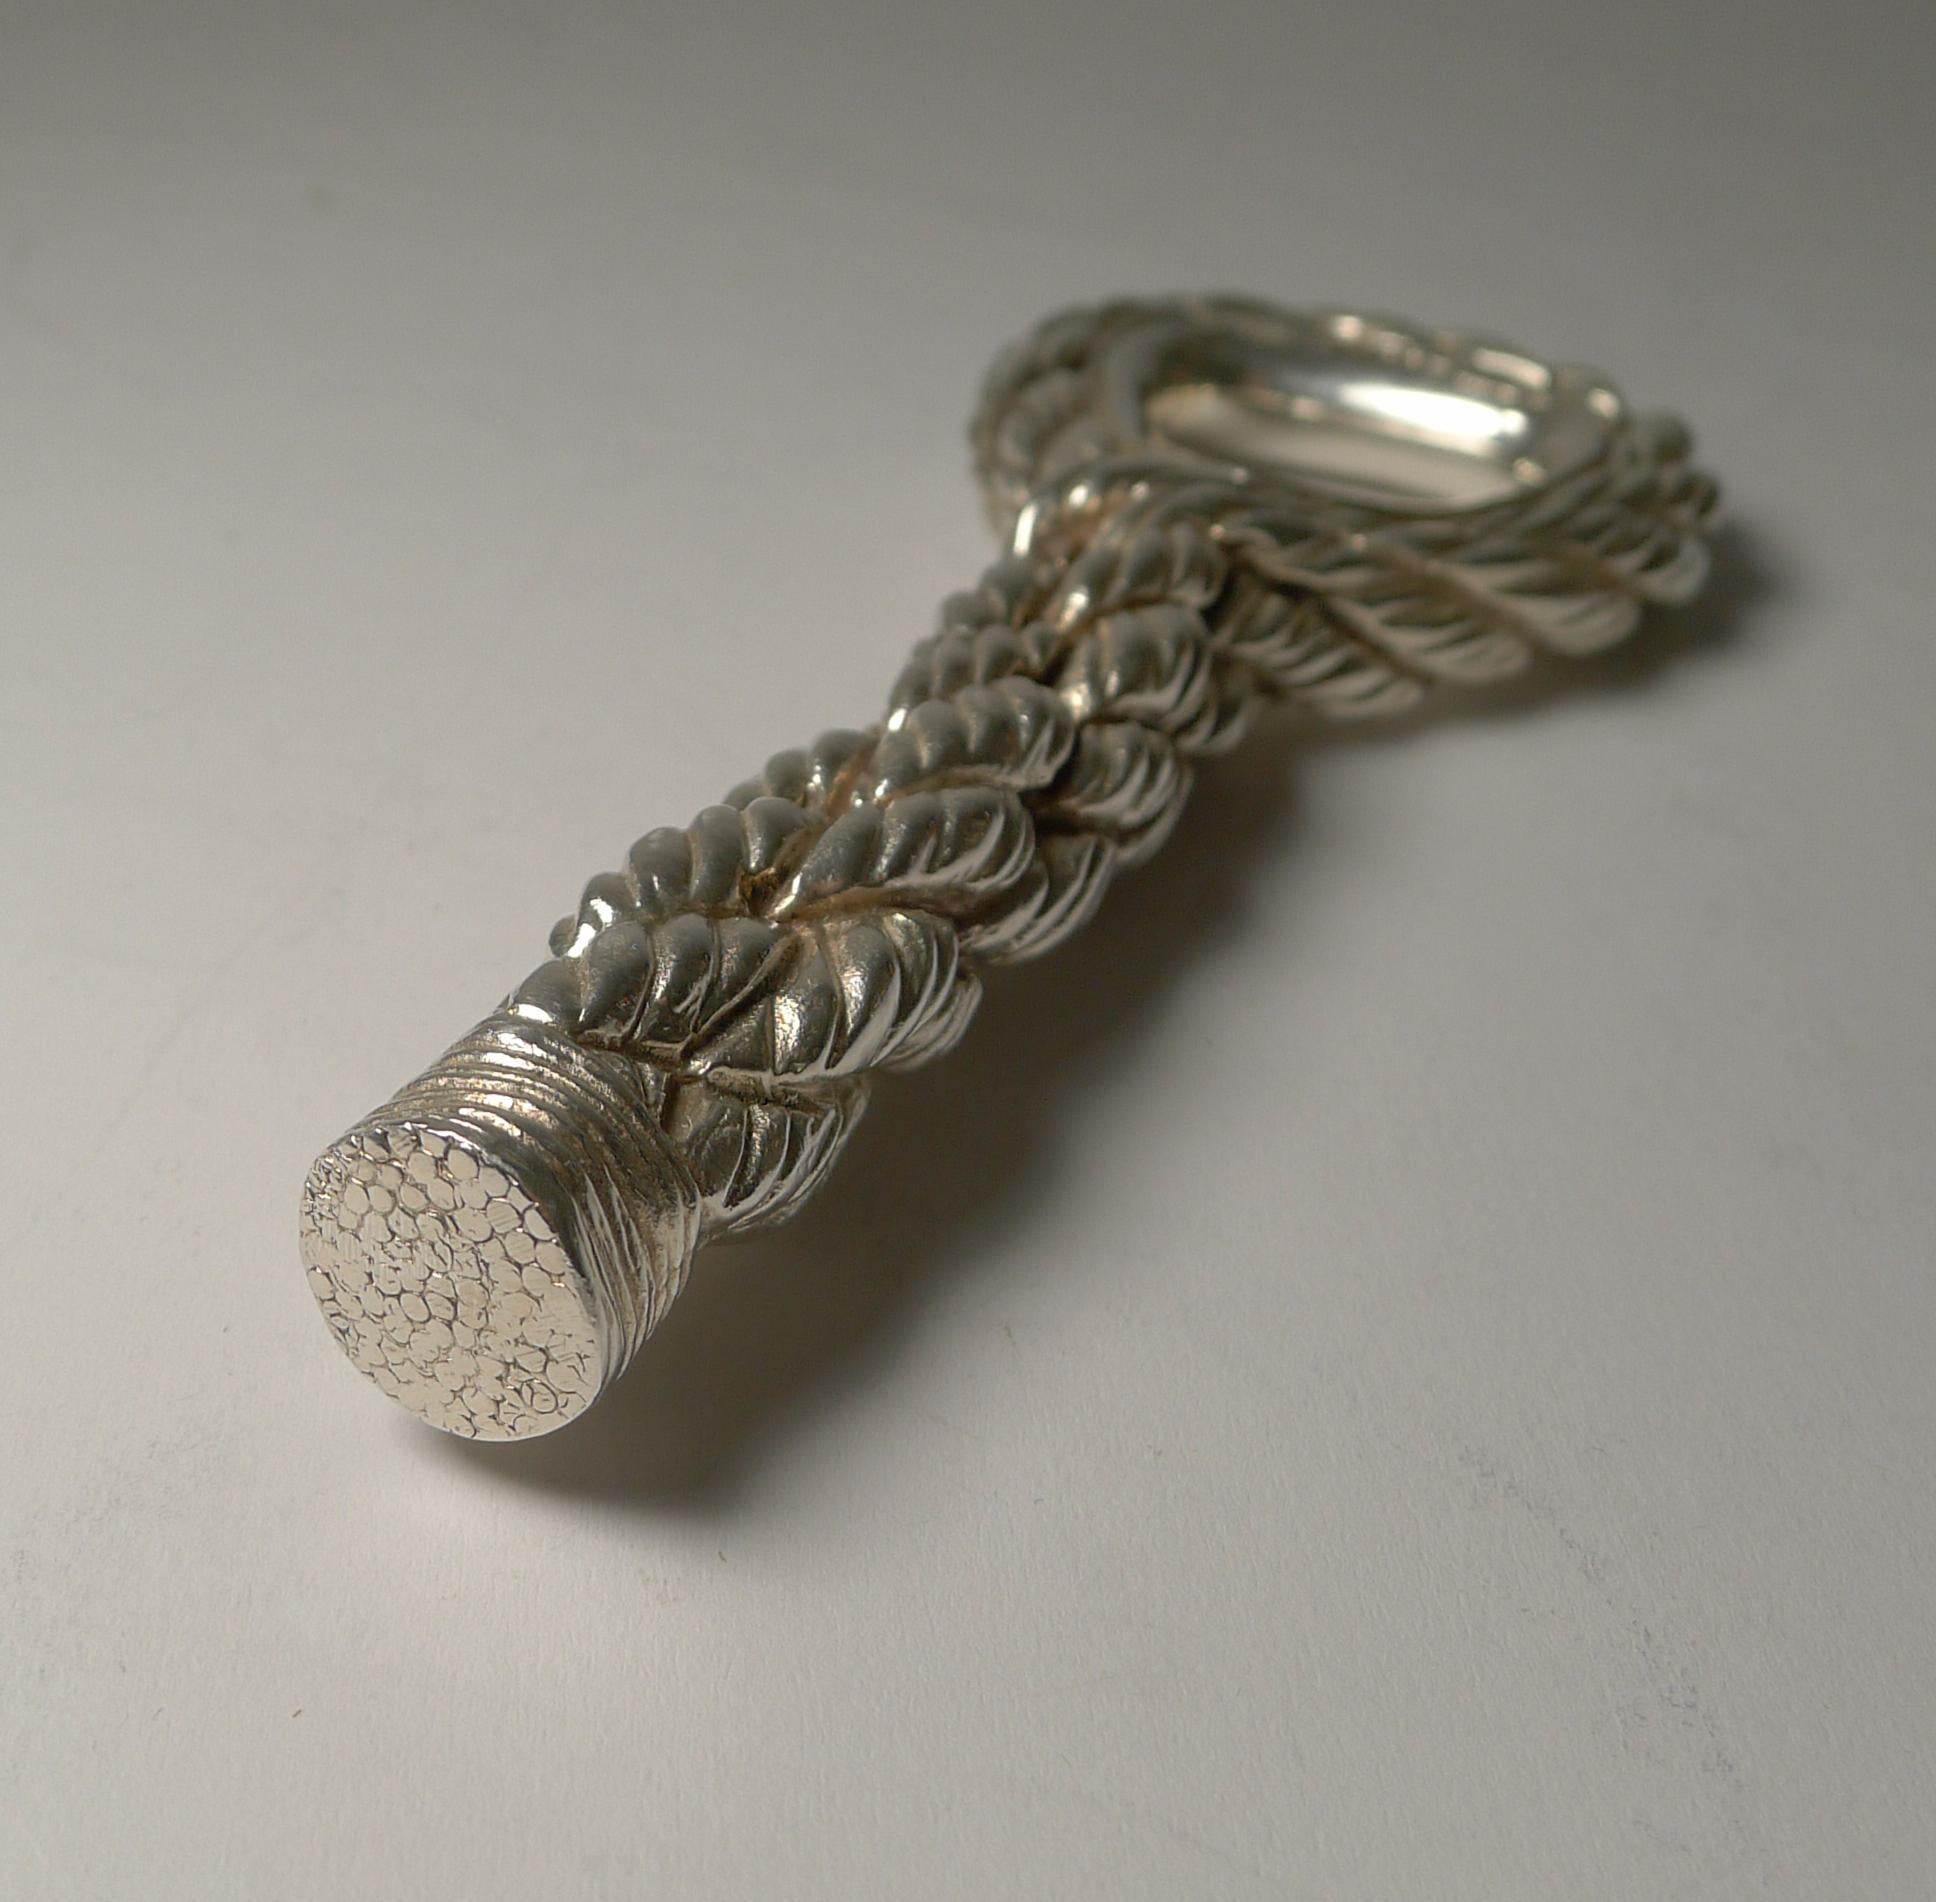 A fabulous vintage French silver plated bottle opener created c.1960's for the 